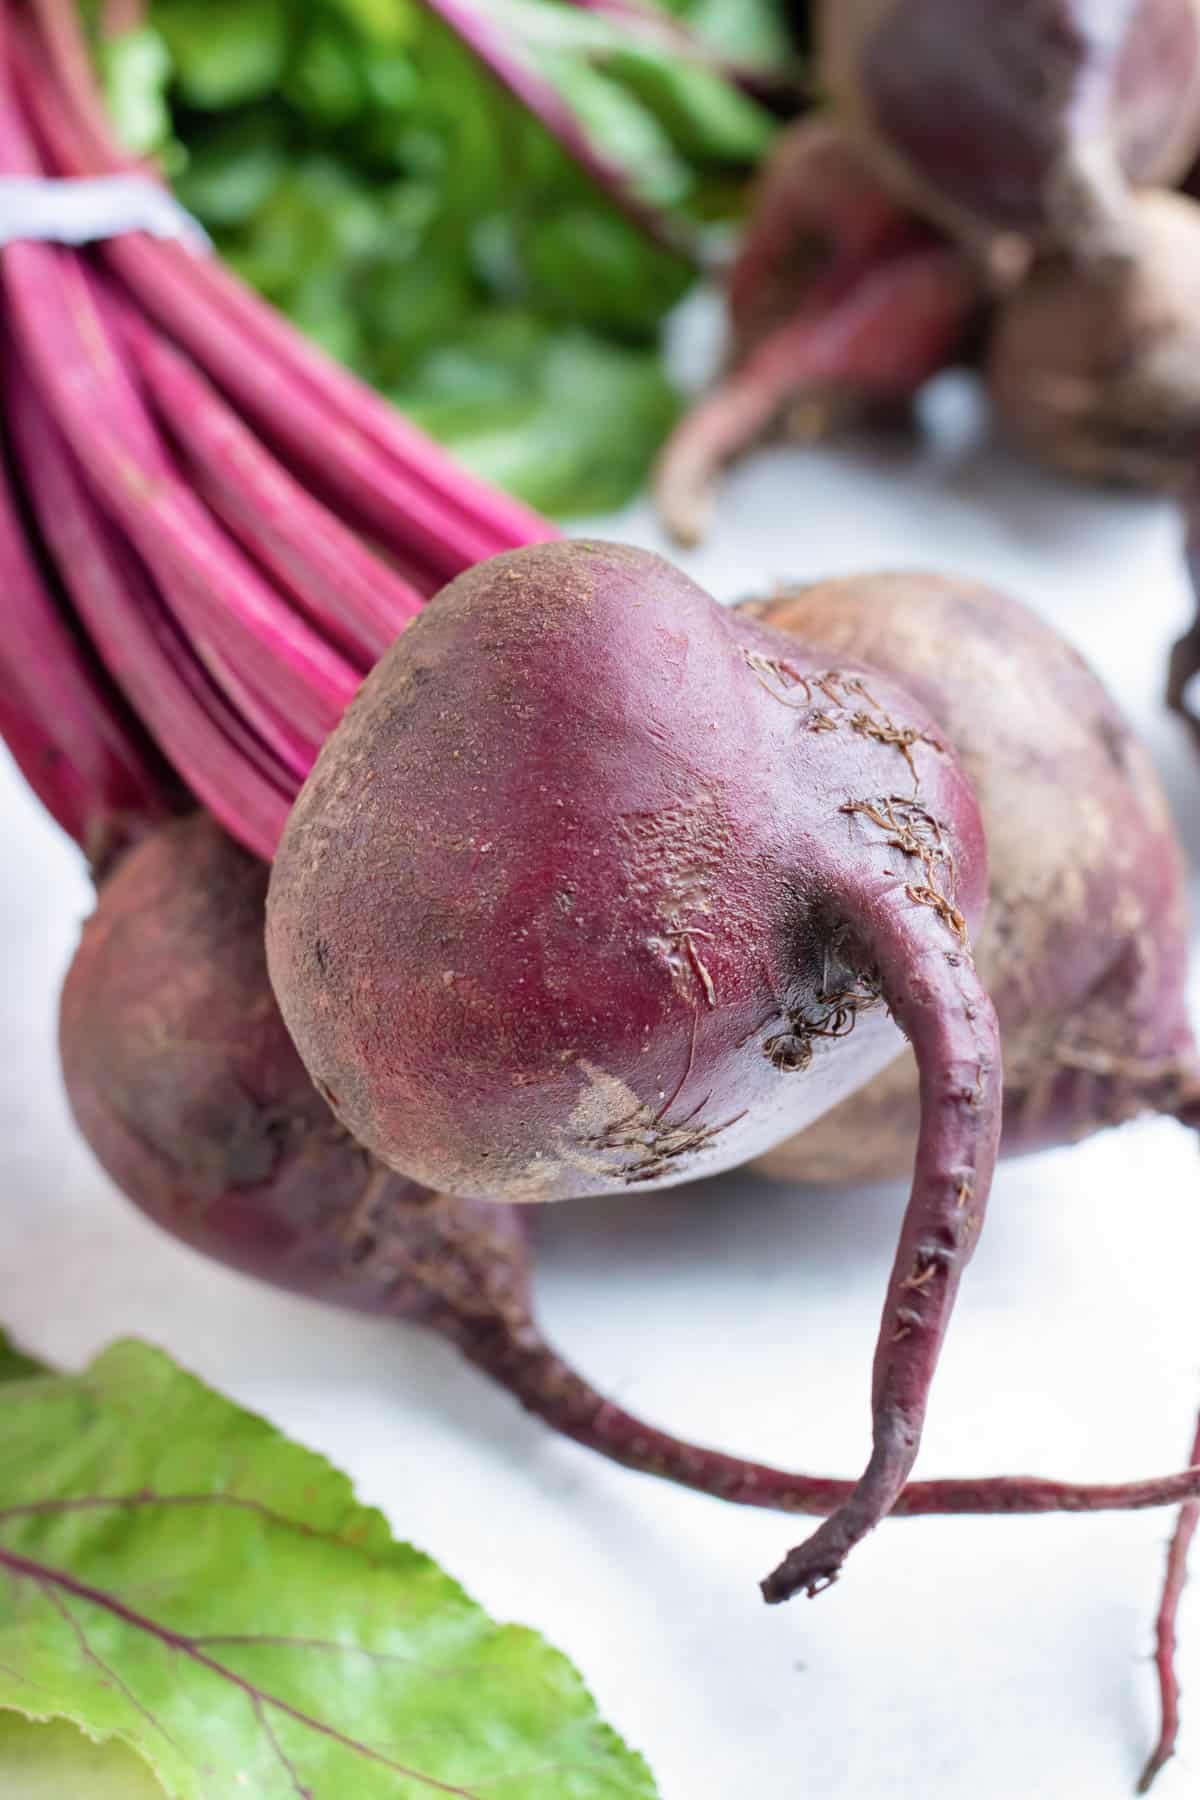 Learn how to boil whole beets for salad or soup recipes.